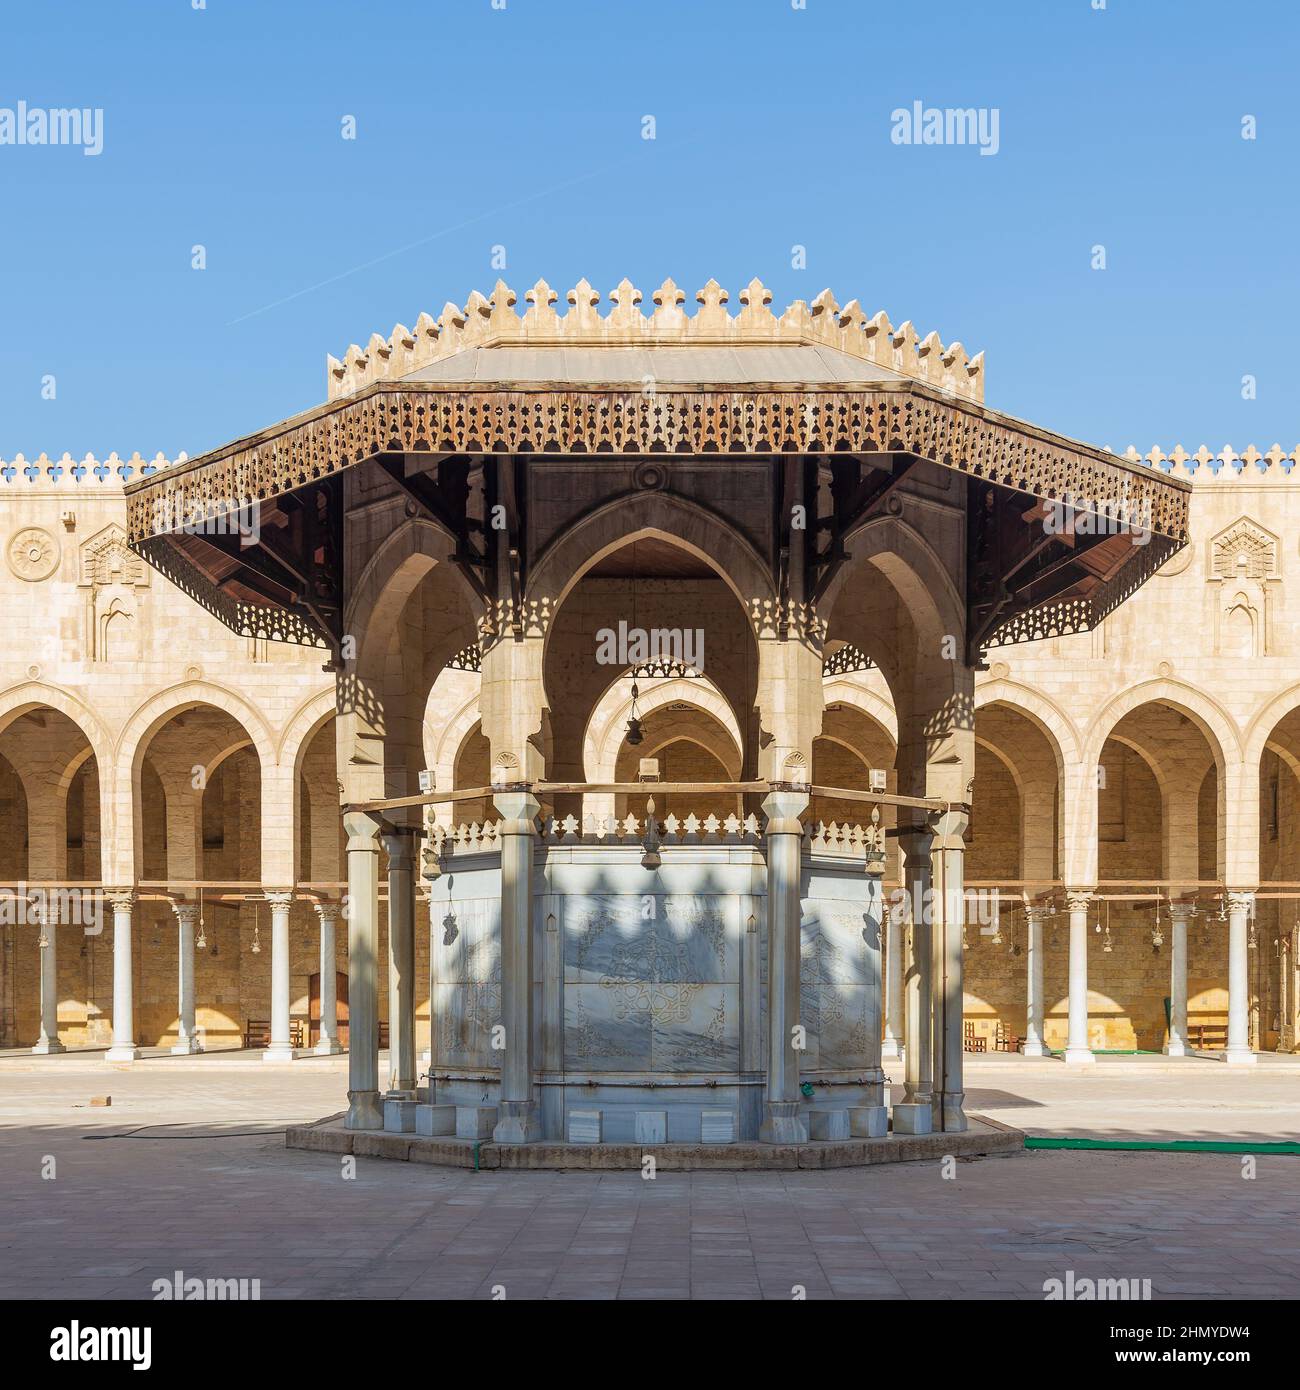 Ablution fountain mediating the courtyard of public historic mosque of Sultan al Muayyad, with background of arched corridor in the back, Cairo, Egypt Stock Photo